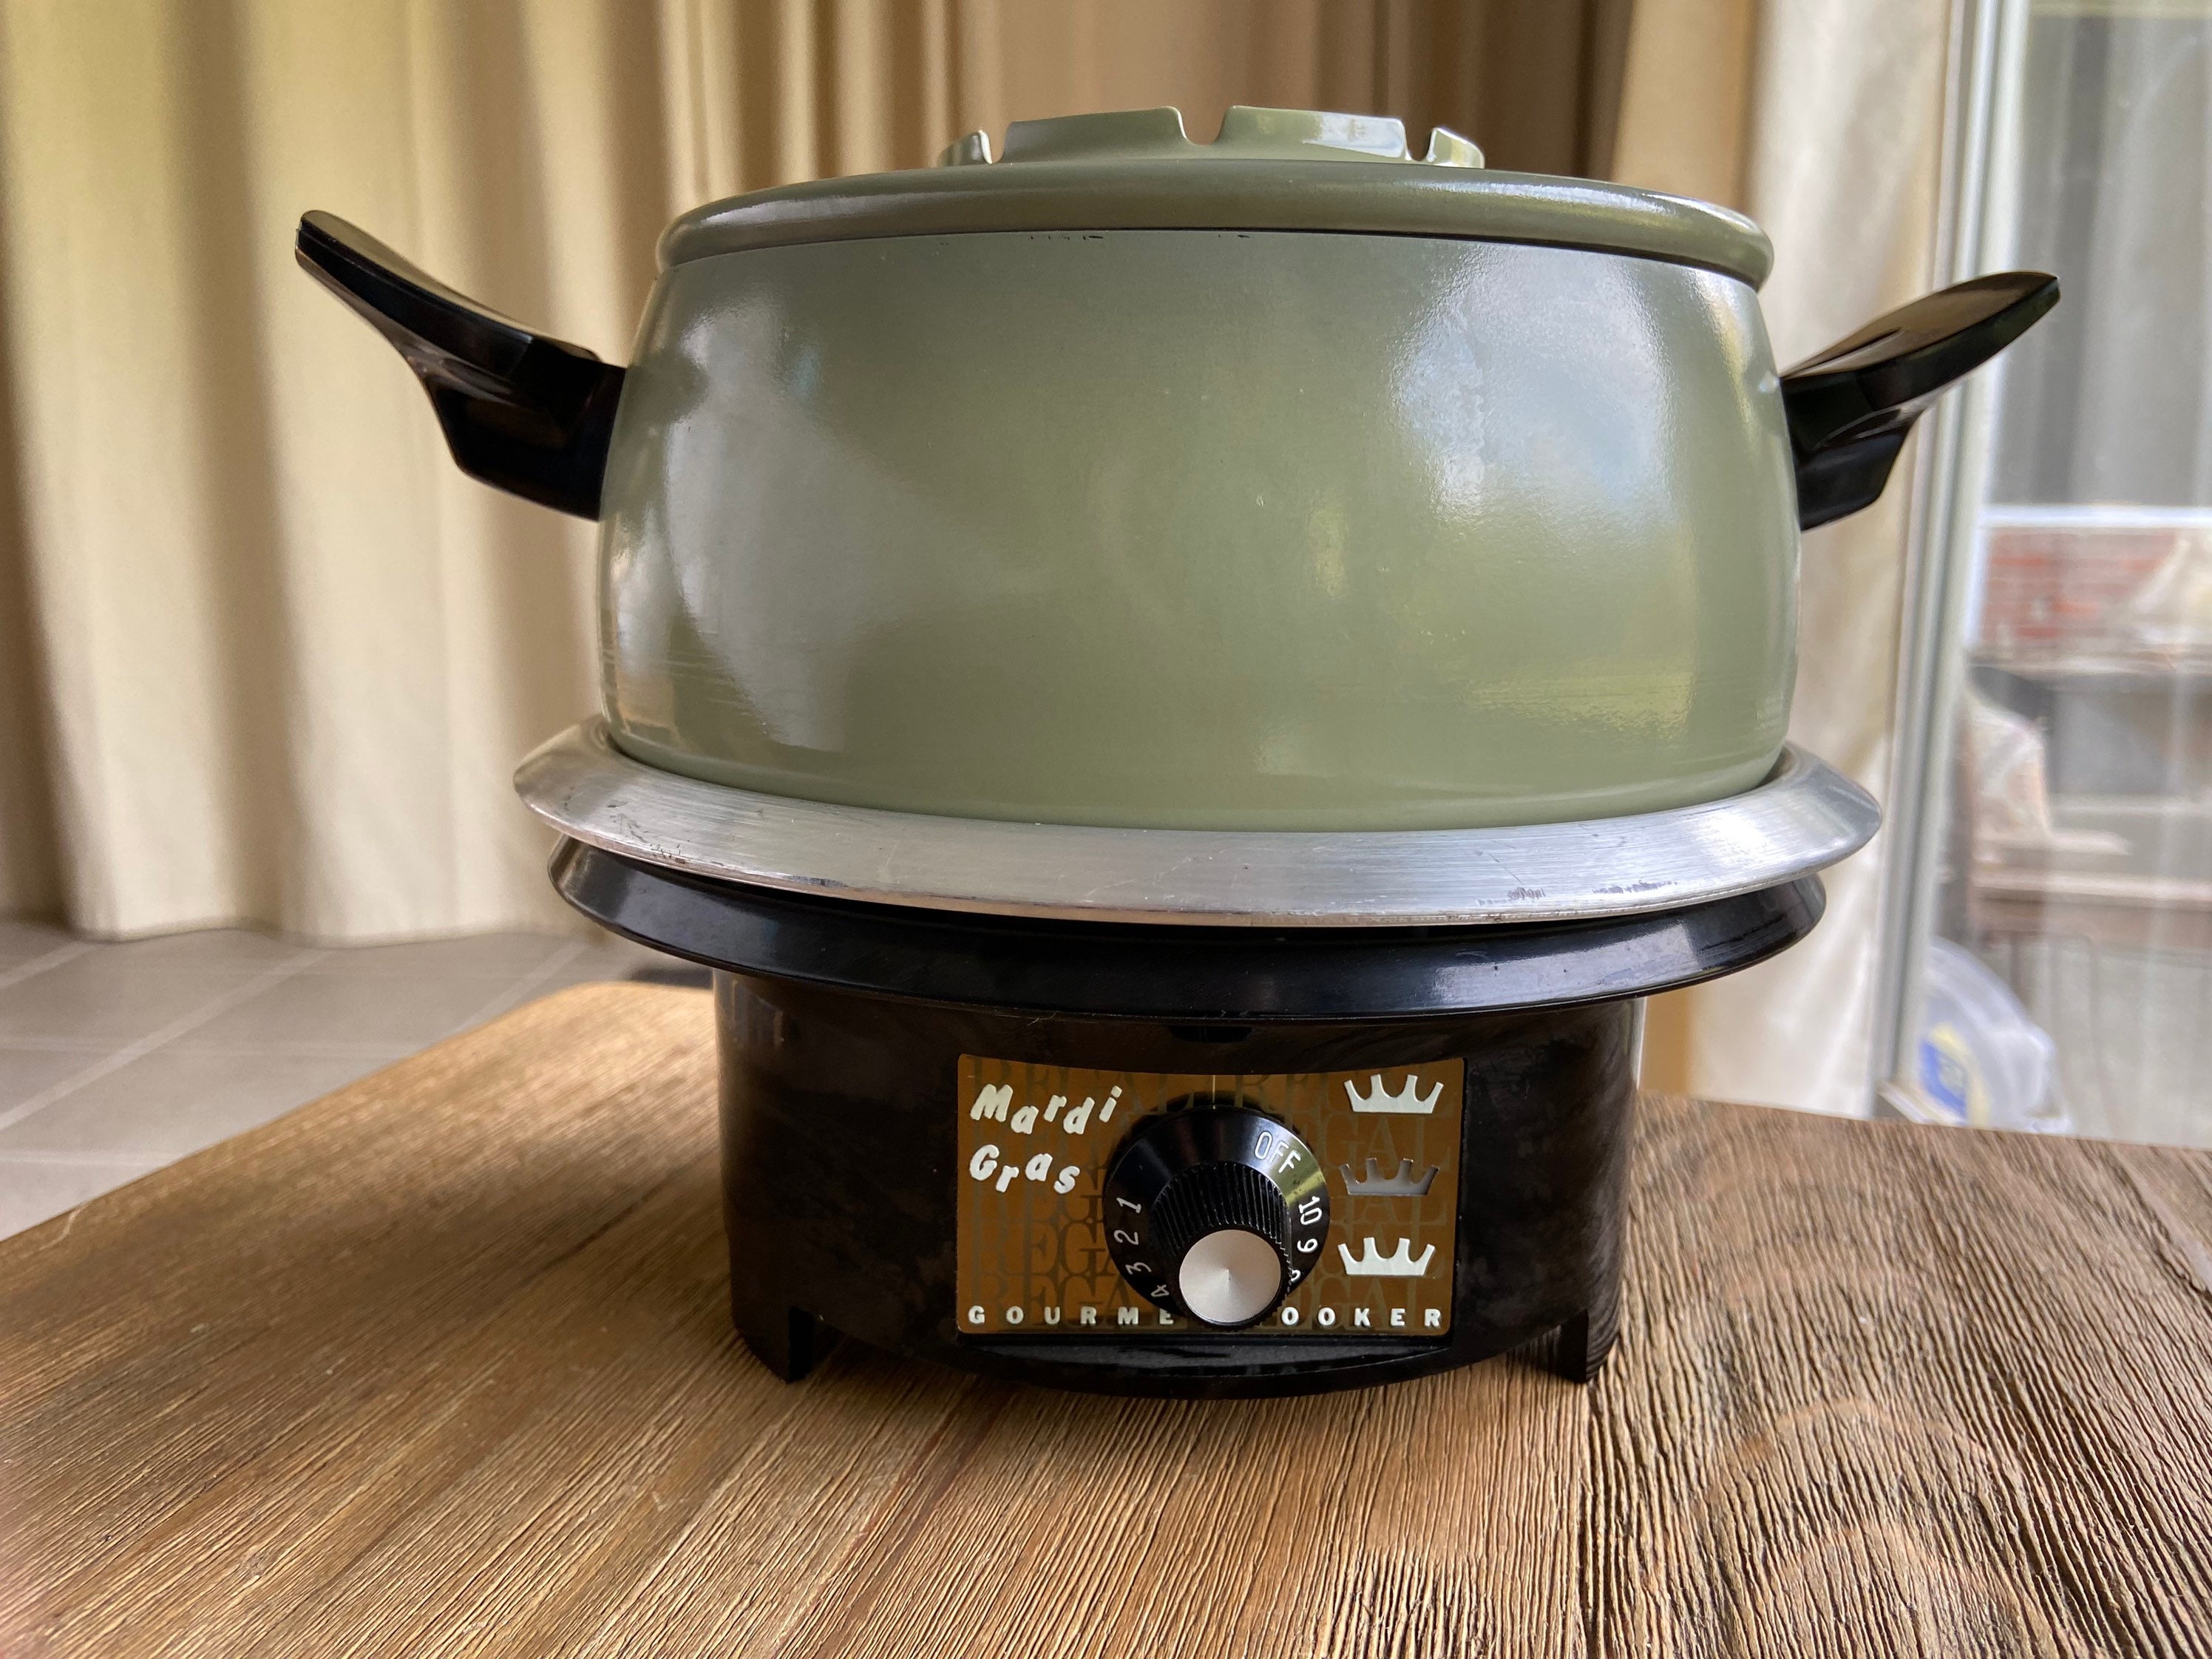 Lot # 424 - Vintage Oster Electric Fondue Pot with Lid in Harvest Gold  Retro with Fondue Forks and Original Box - Puget Sound Estate Auctions.com